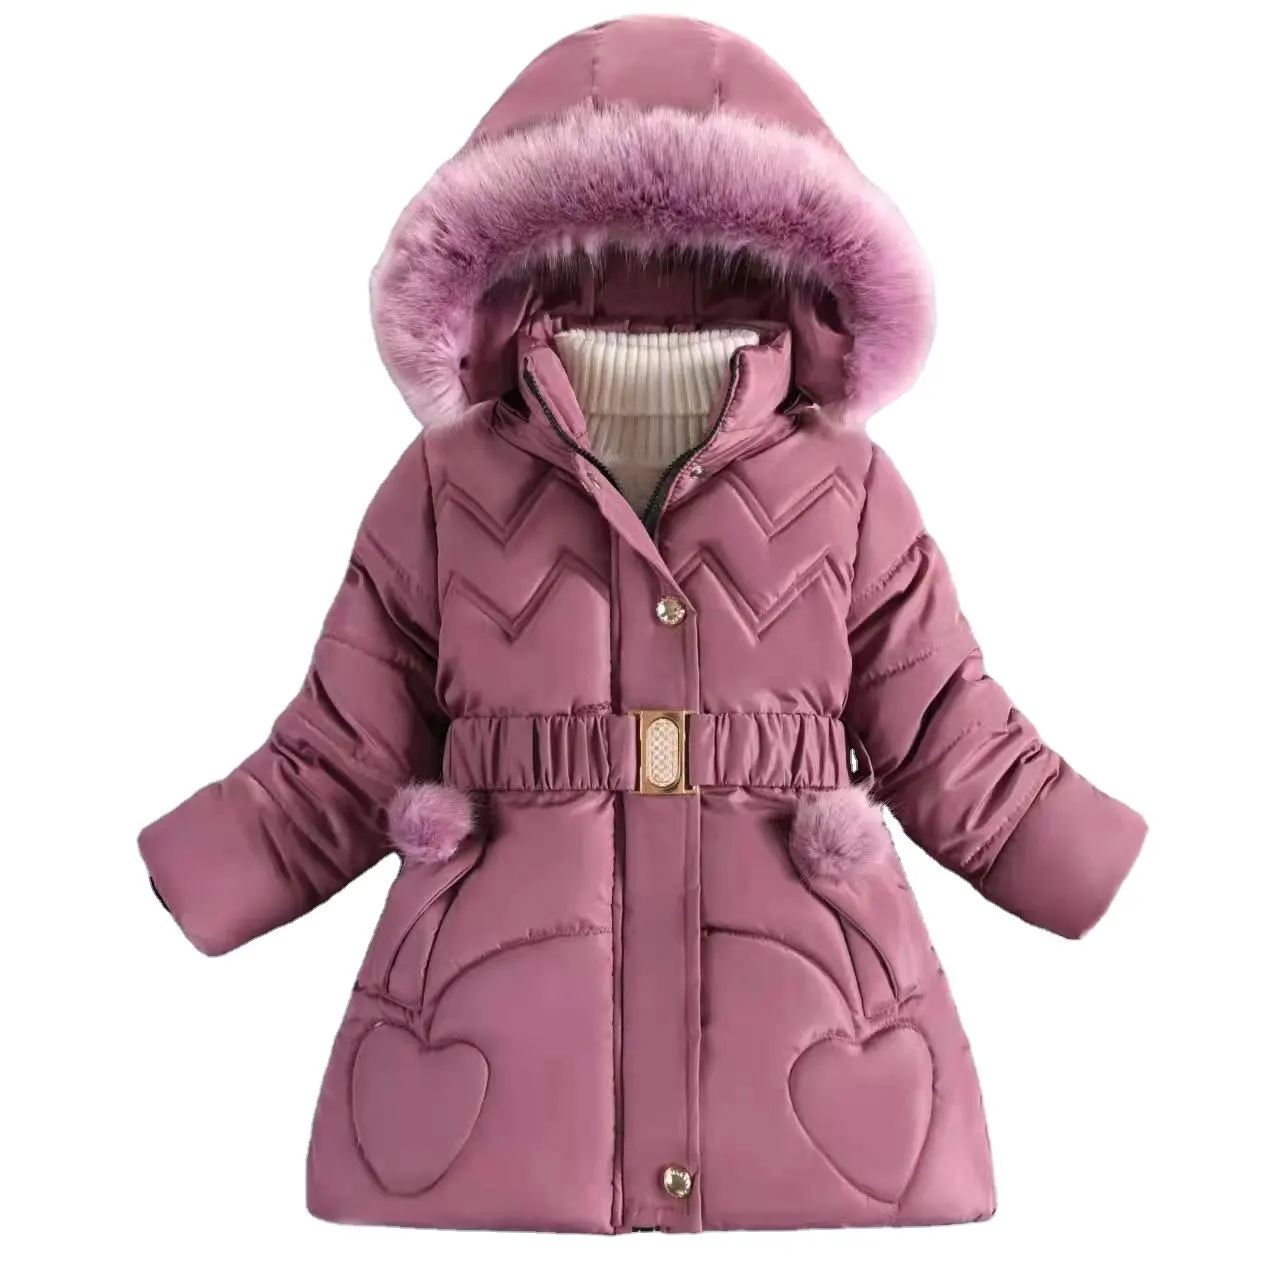 Winter Kids Coat Solid Color Children's Middle Long Coat For Girl Leisure sports fashion cotton padded clothes baby down jacket